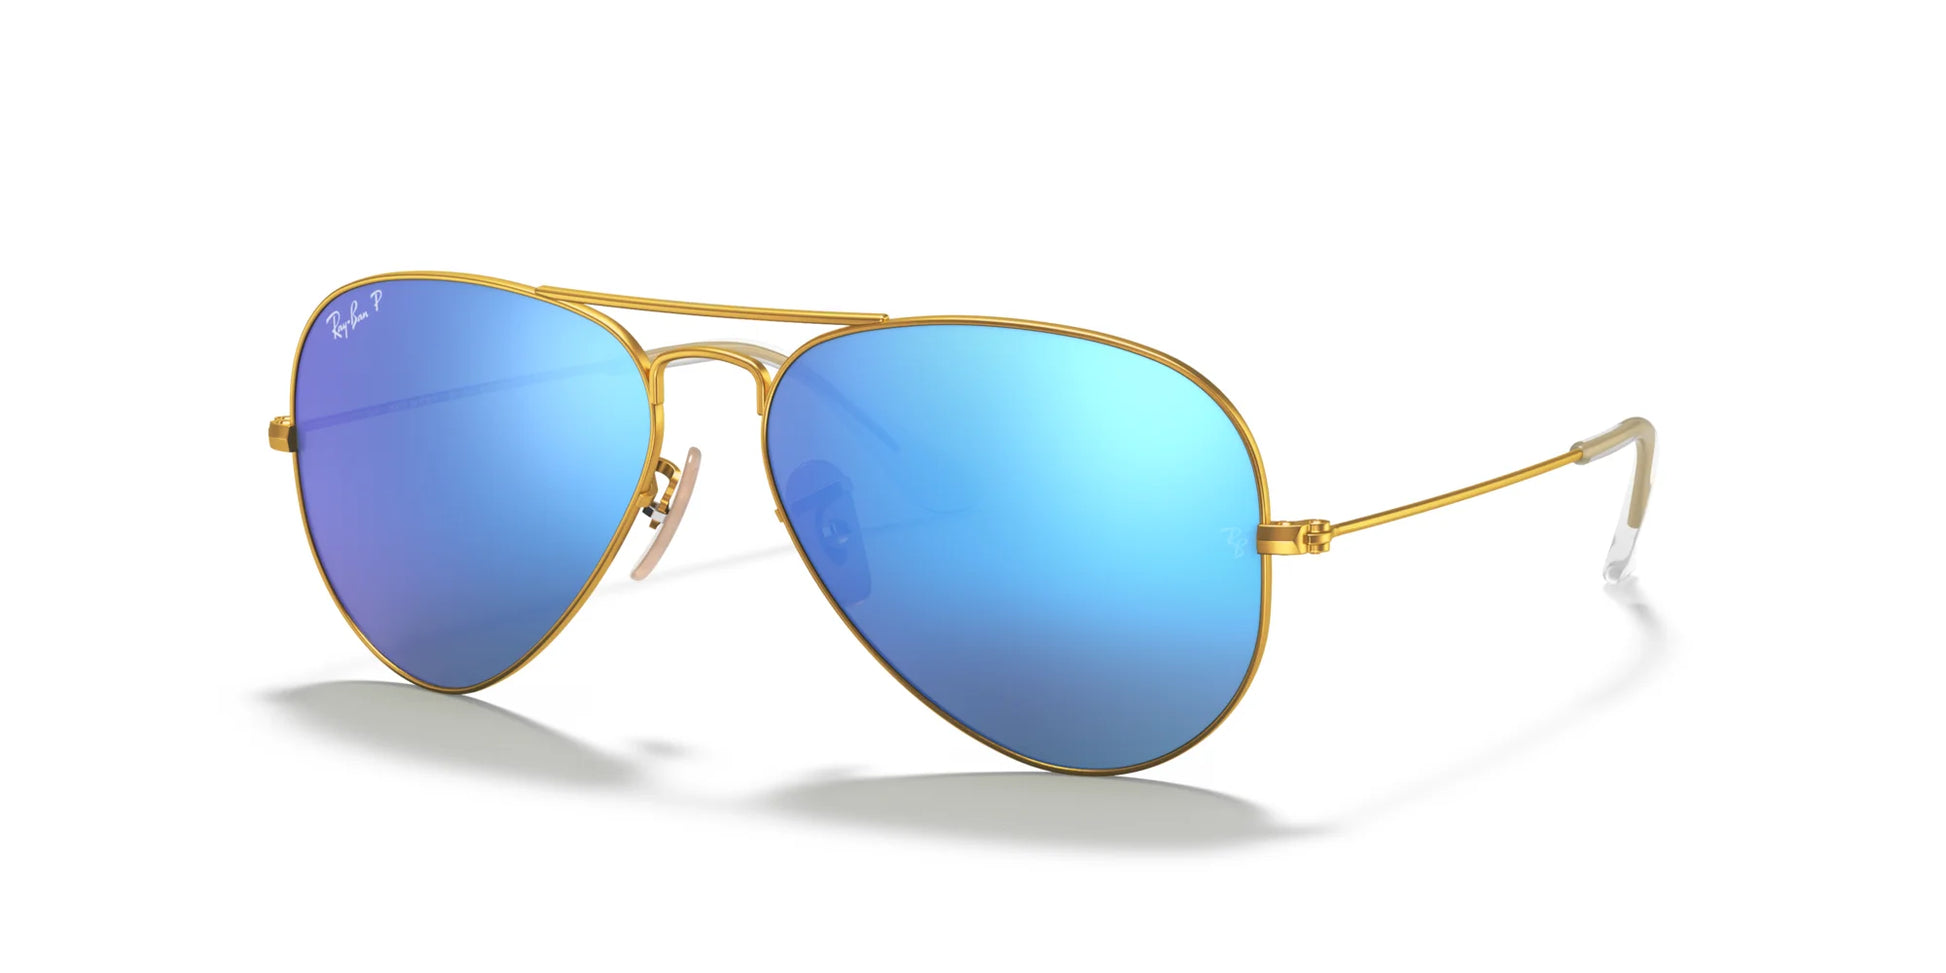 Ray-Ban AVIATOR LARGE METAL RB3025 Sunglasses | Size 58 Gold / Blue